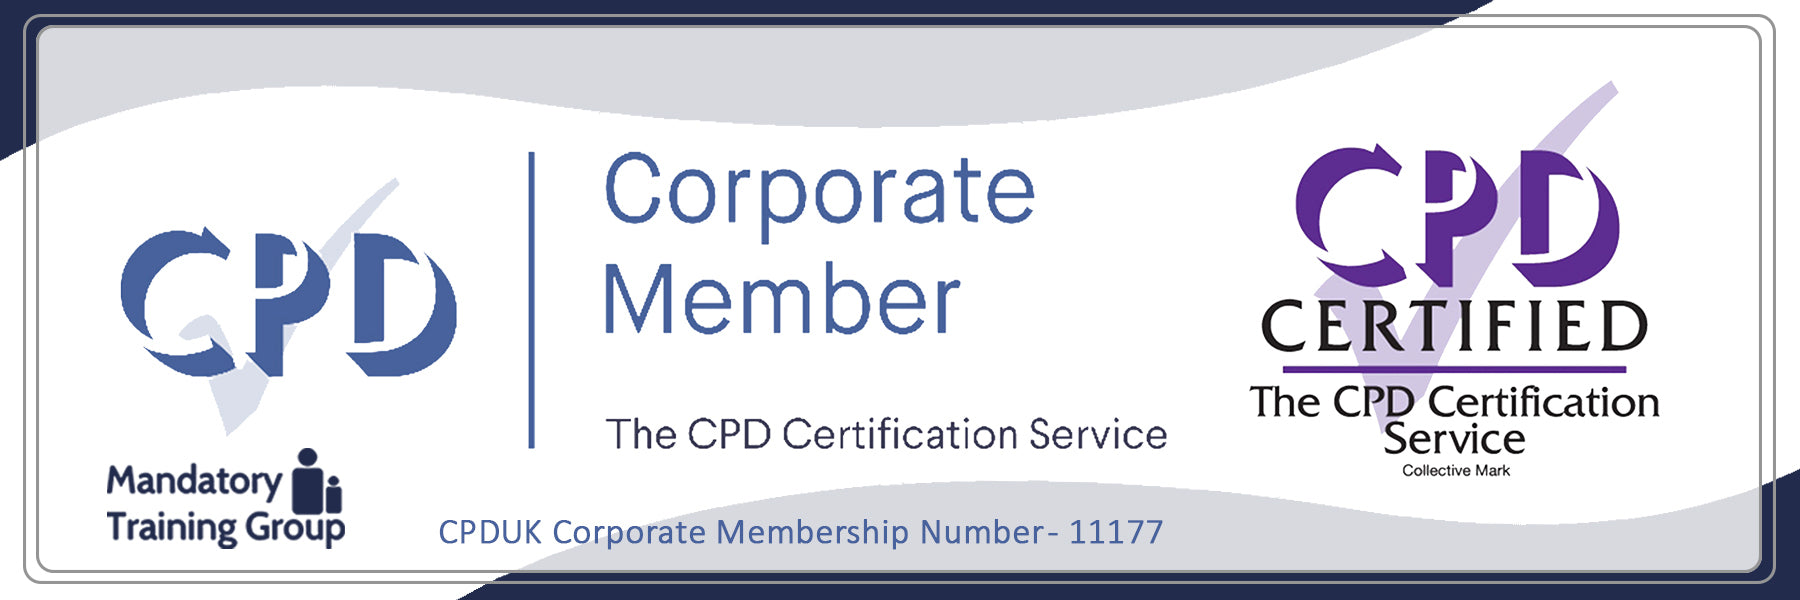 Care Certificate Standard 4 - Train the Trainer Course + Trainer Pack - eLearning Course - The Mandatory Training Group UK -